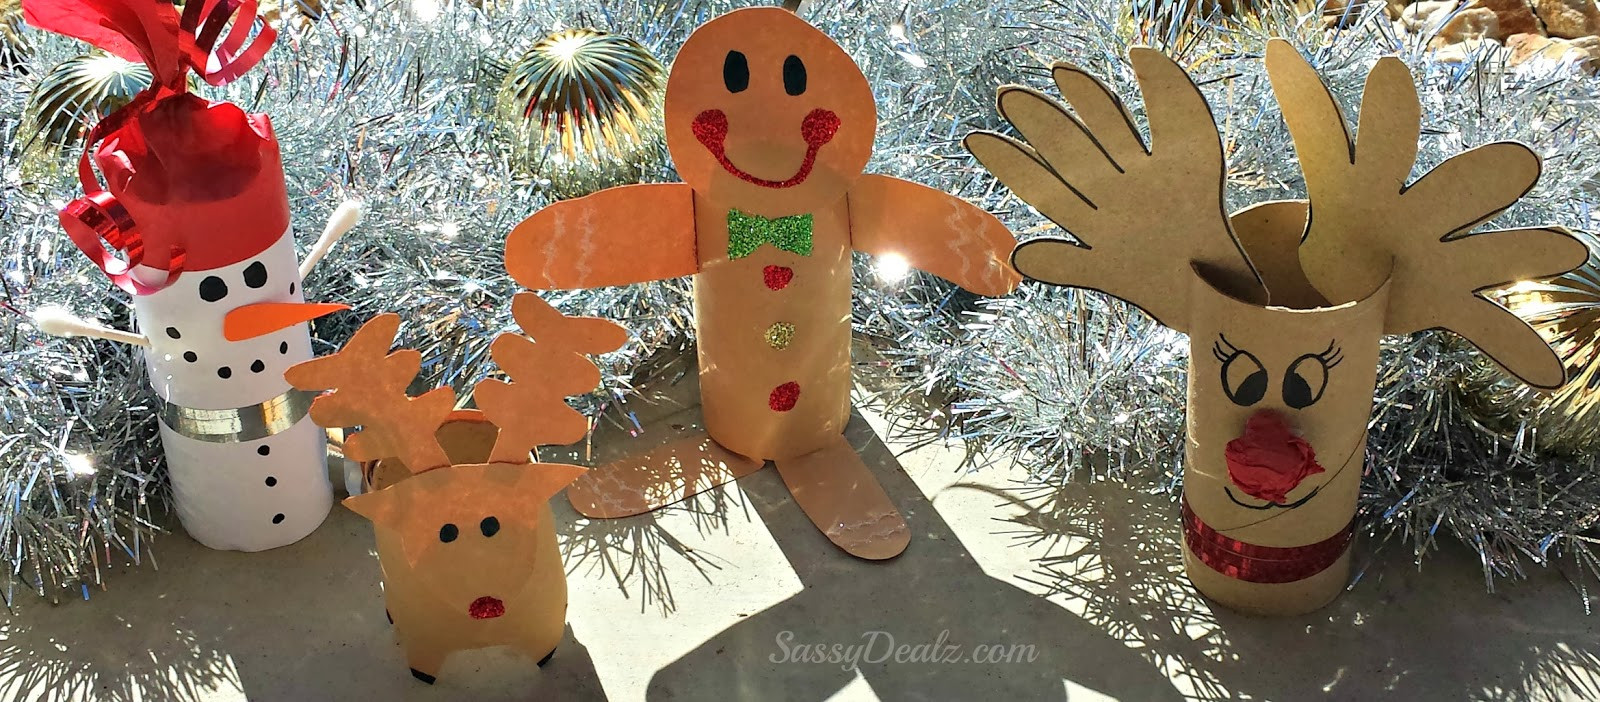 Toilet Paper Roll Christmas Craft
 DIY Christmas Toilet Paper Roll Craft Ideas For Kids